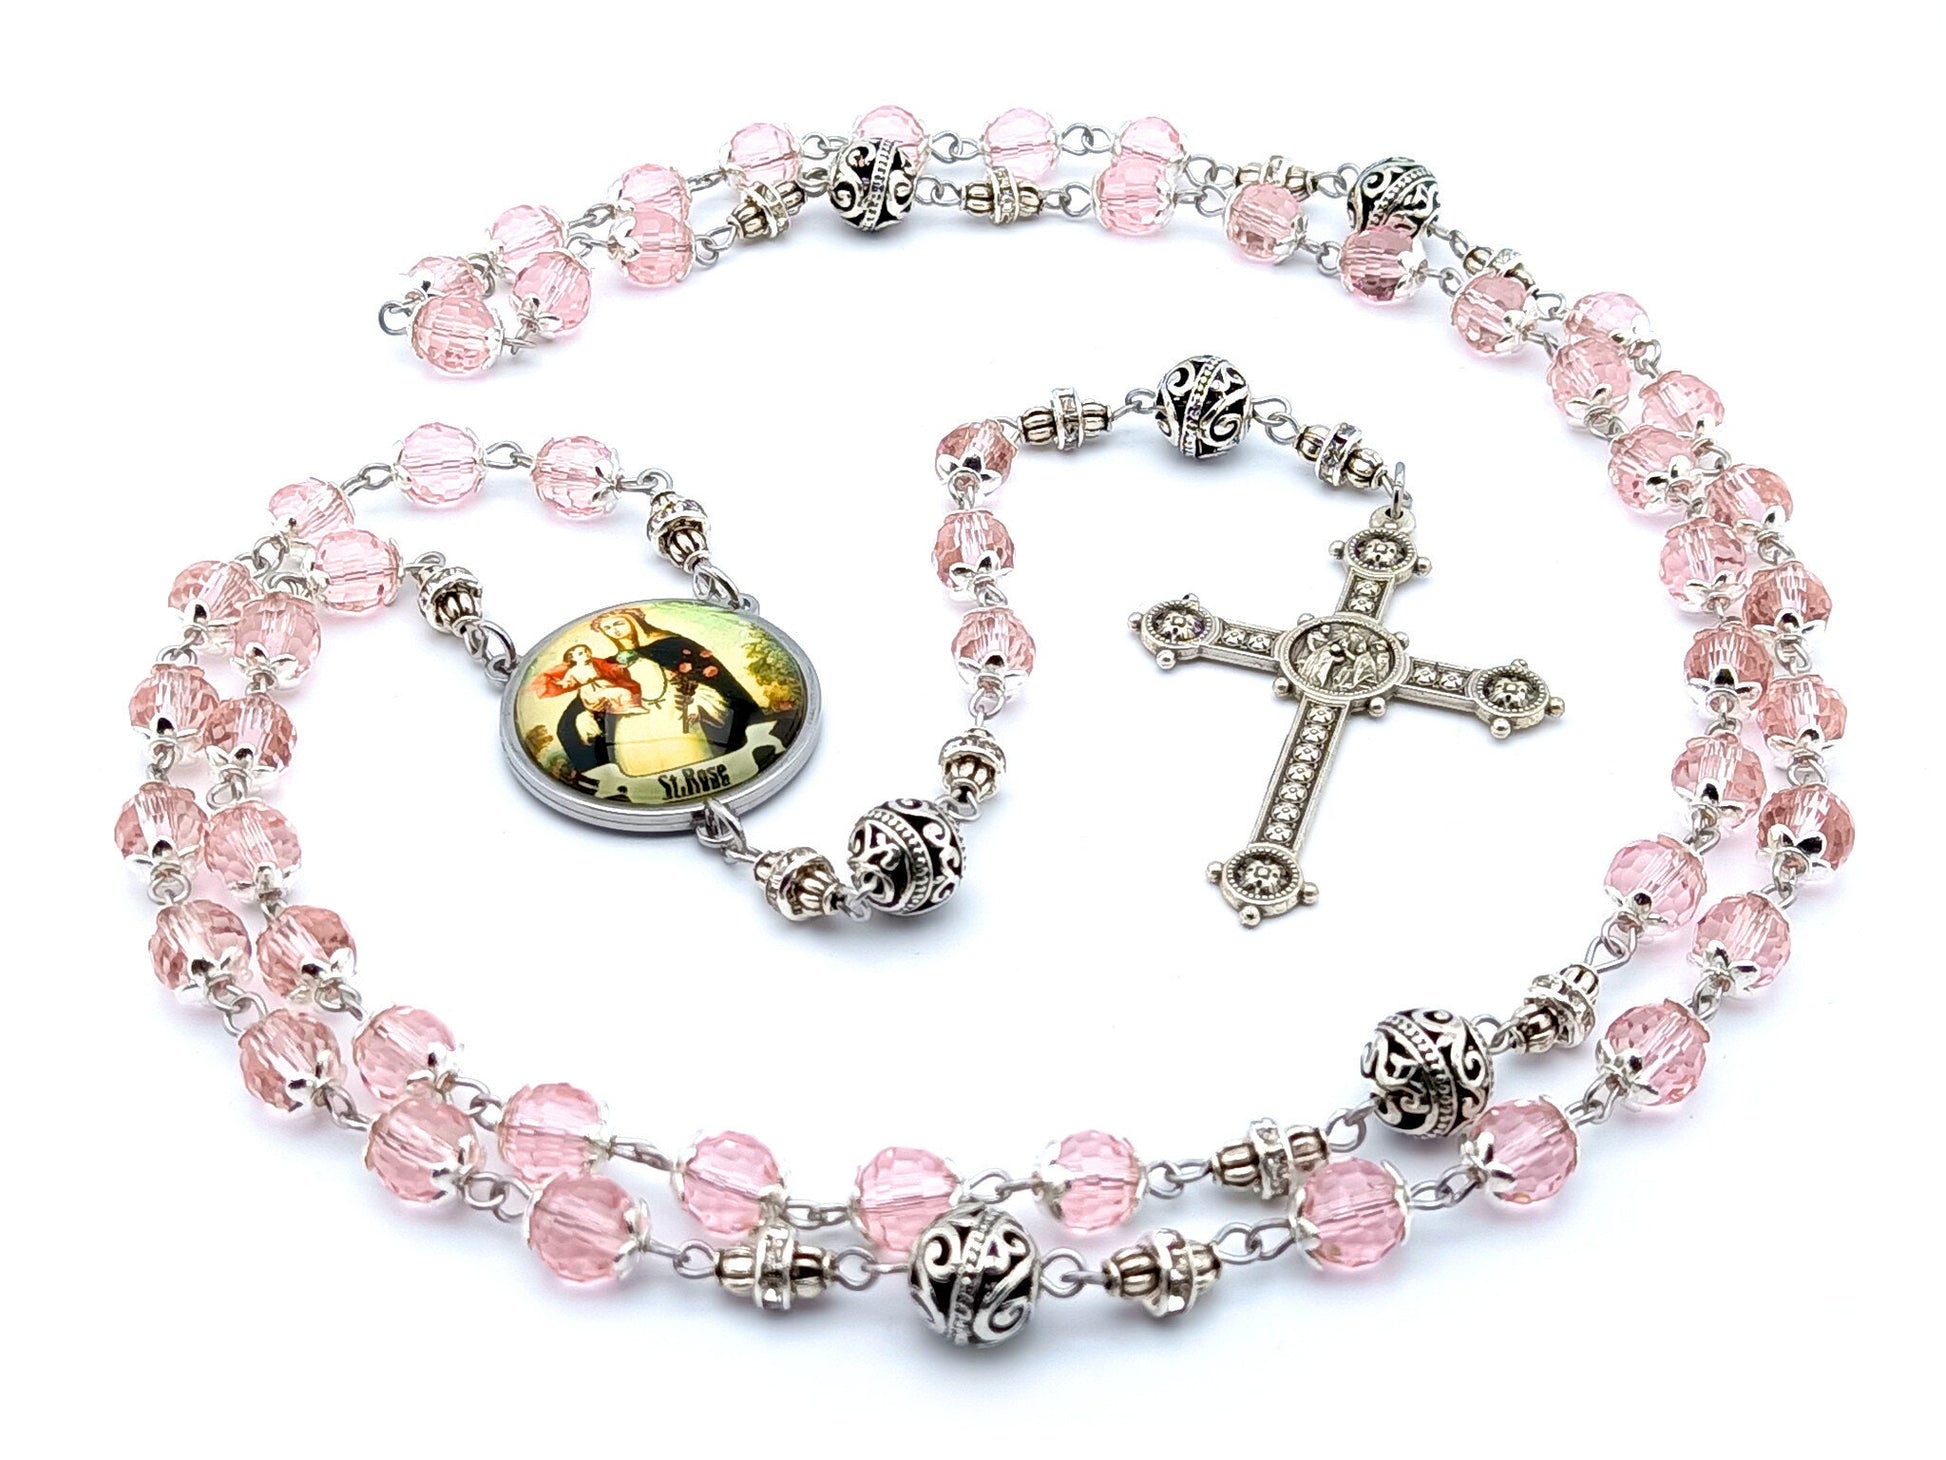 Saint Rose unique rosary beads with pink faceted glass and silver beads, silver crucifix and picture centre medal.